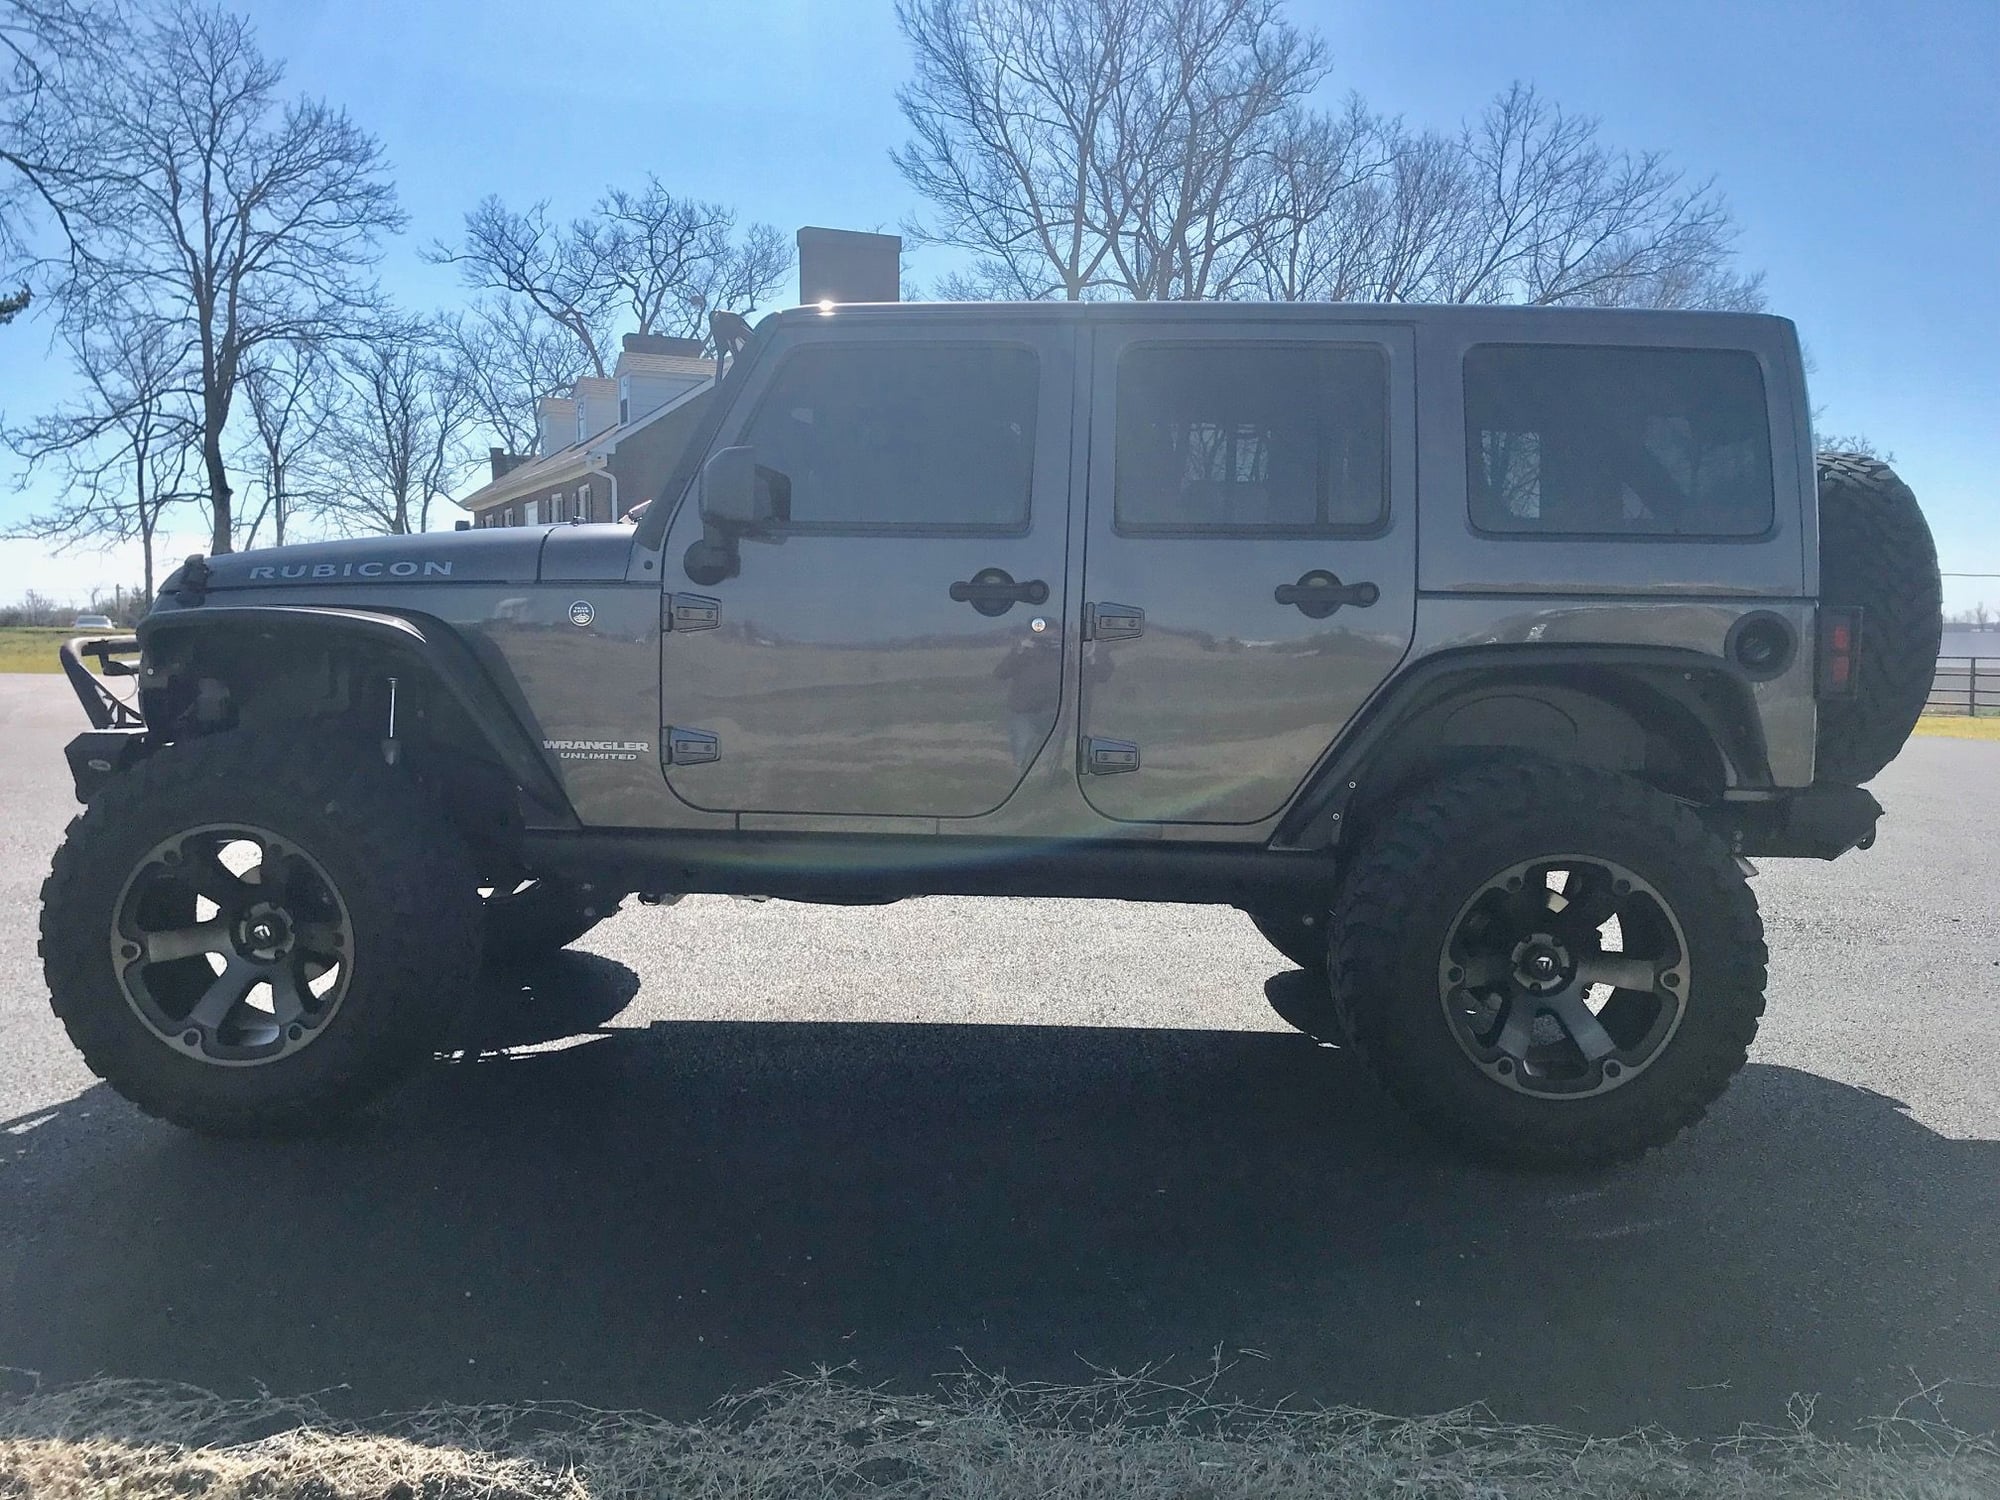 2016 Jeep Wrangler - 2016 Jeep Wrangler Rubicon - Supercharged - Used - VIN 1C4BJWFG4GL284125 - 37,800 Miles - 6 cyl - 4WD - Automatic - SUV - Gray - Harrodsburg, KY 40330, United States